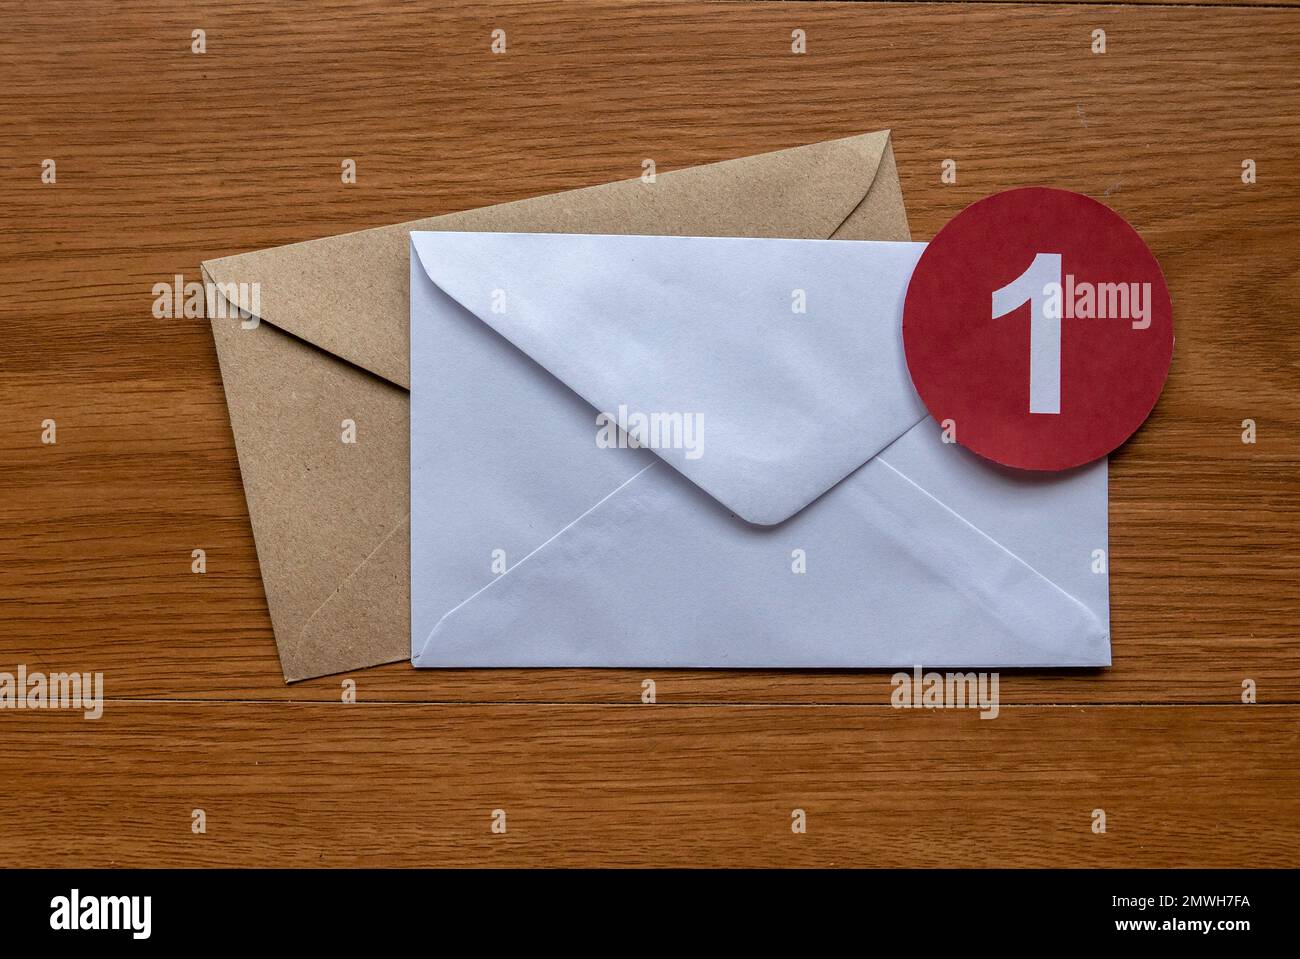 Concept of new email reminder or message alert. A white envelope with a red symbol of notification on a wooden background. Stock Photo